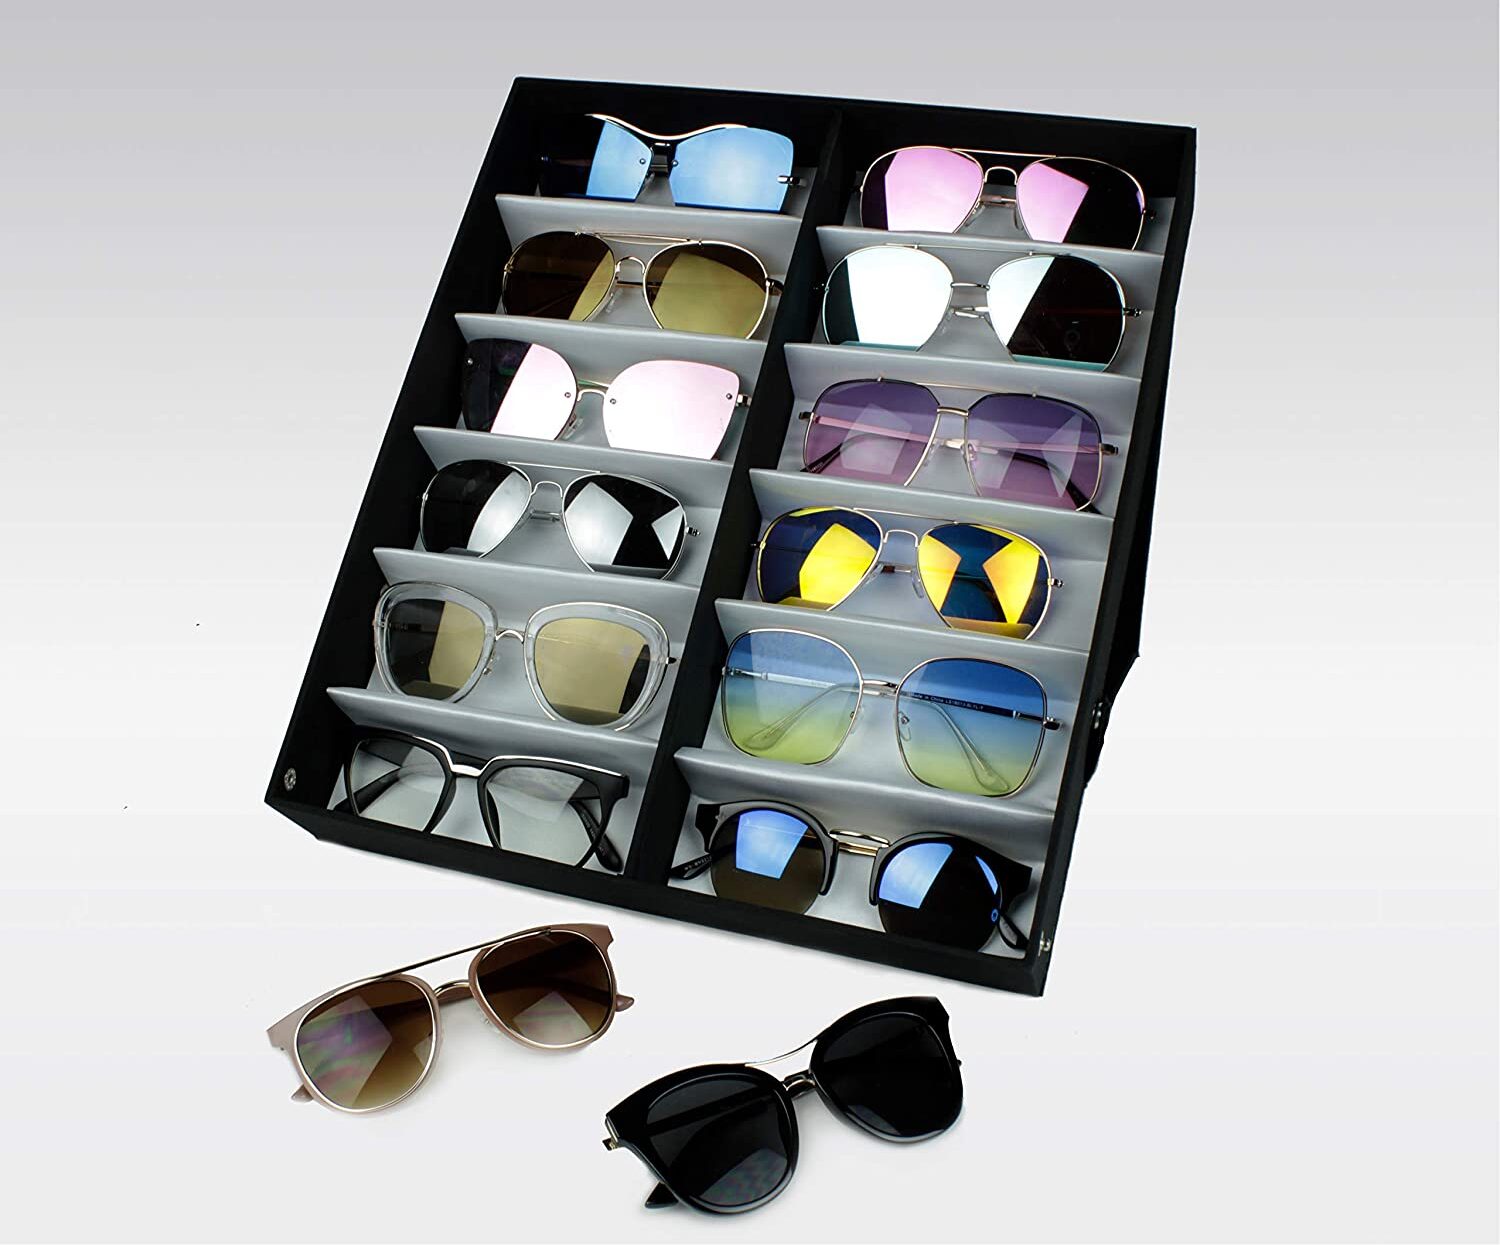 16 Sunglasses Storage Ideas for Summer and Beyond